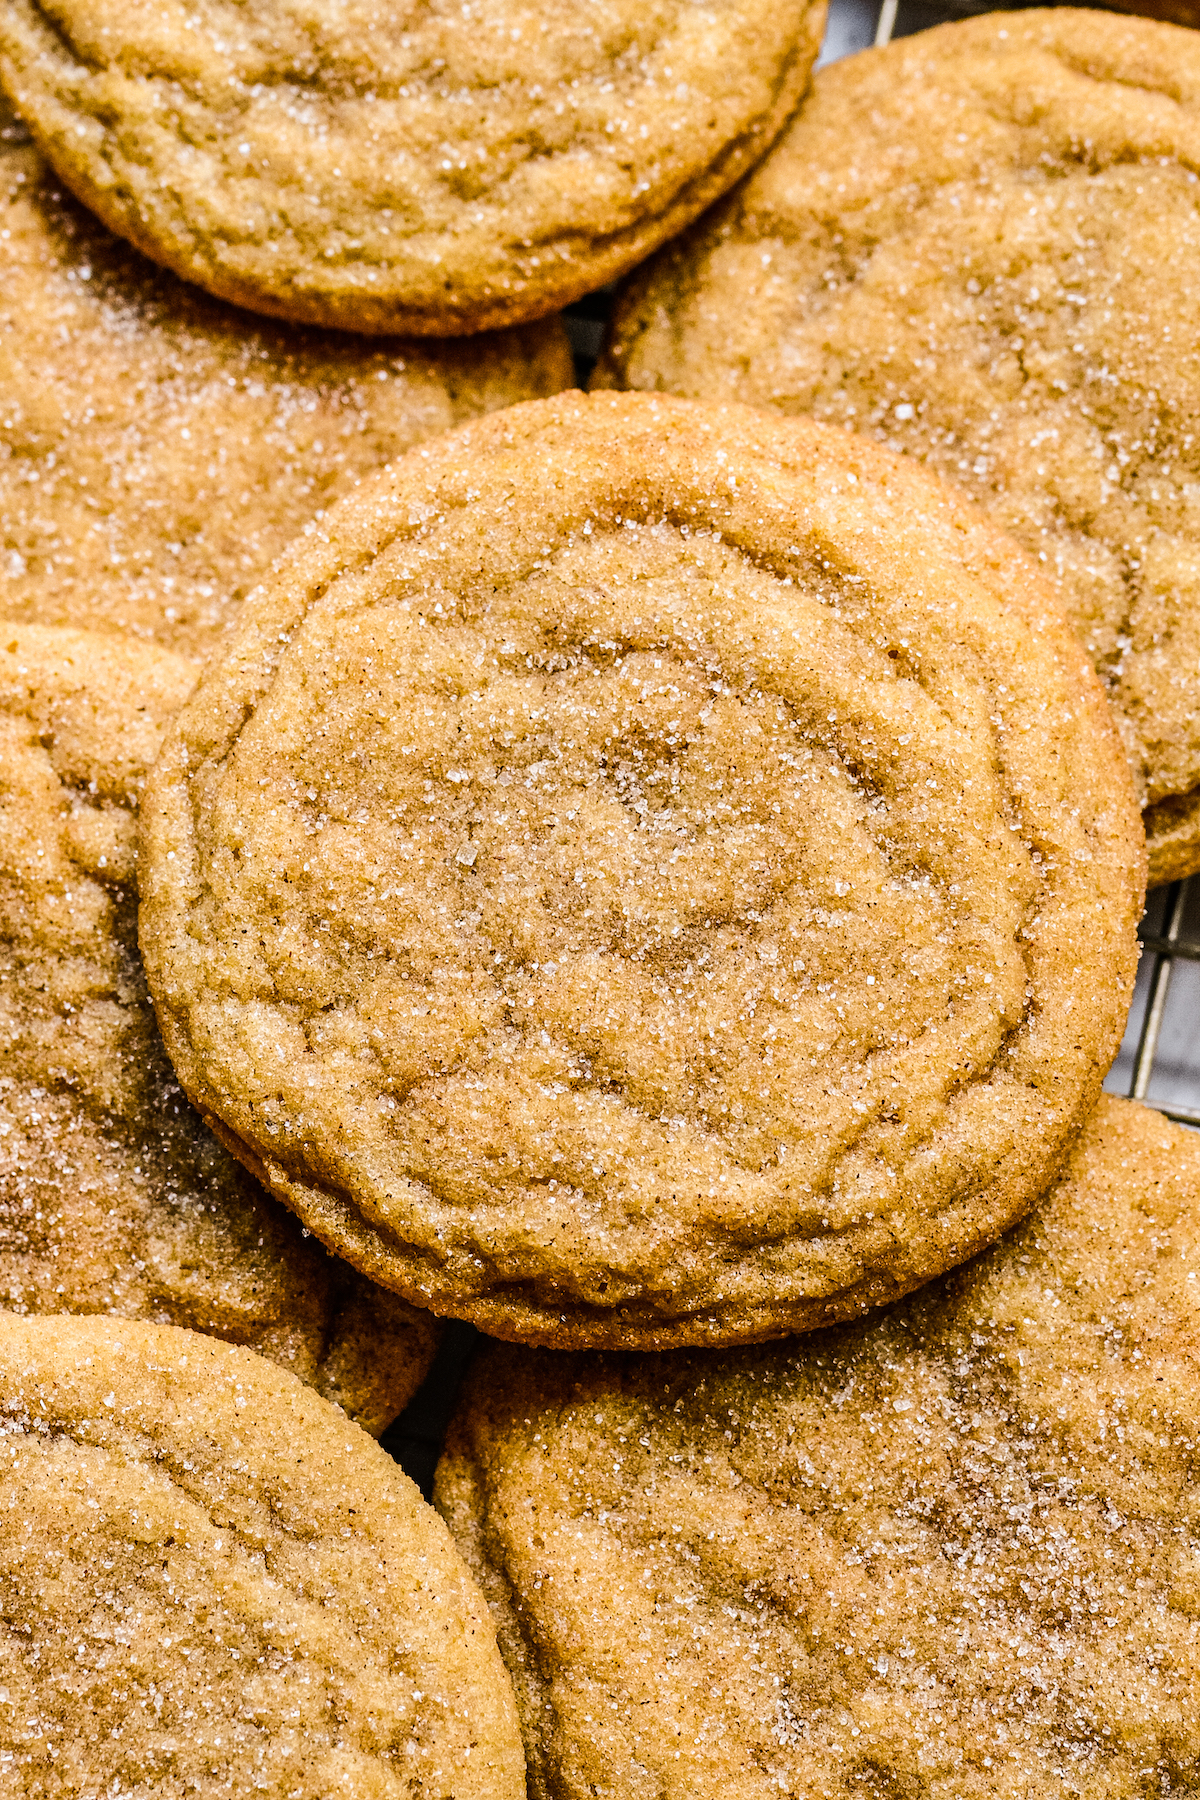 Close-up shot of maple snickerdoodles, showing the texture of the cinnamon coating on each cookie.